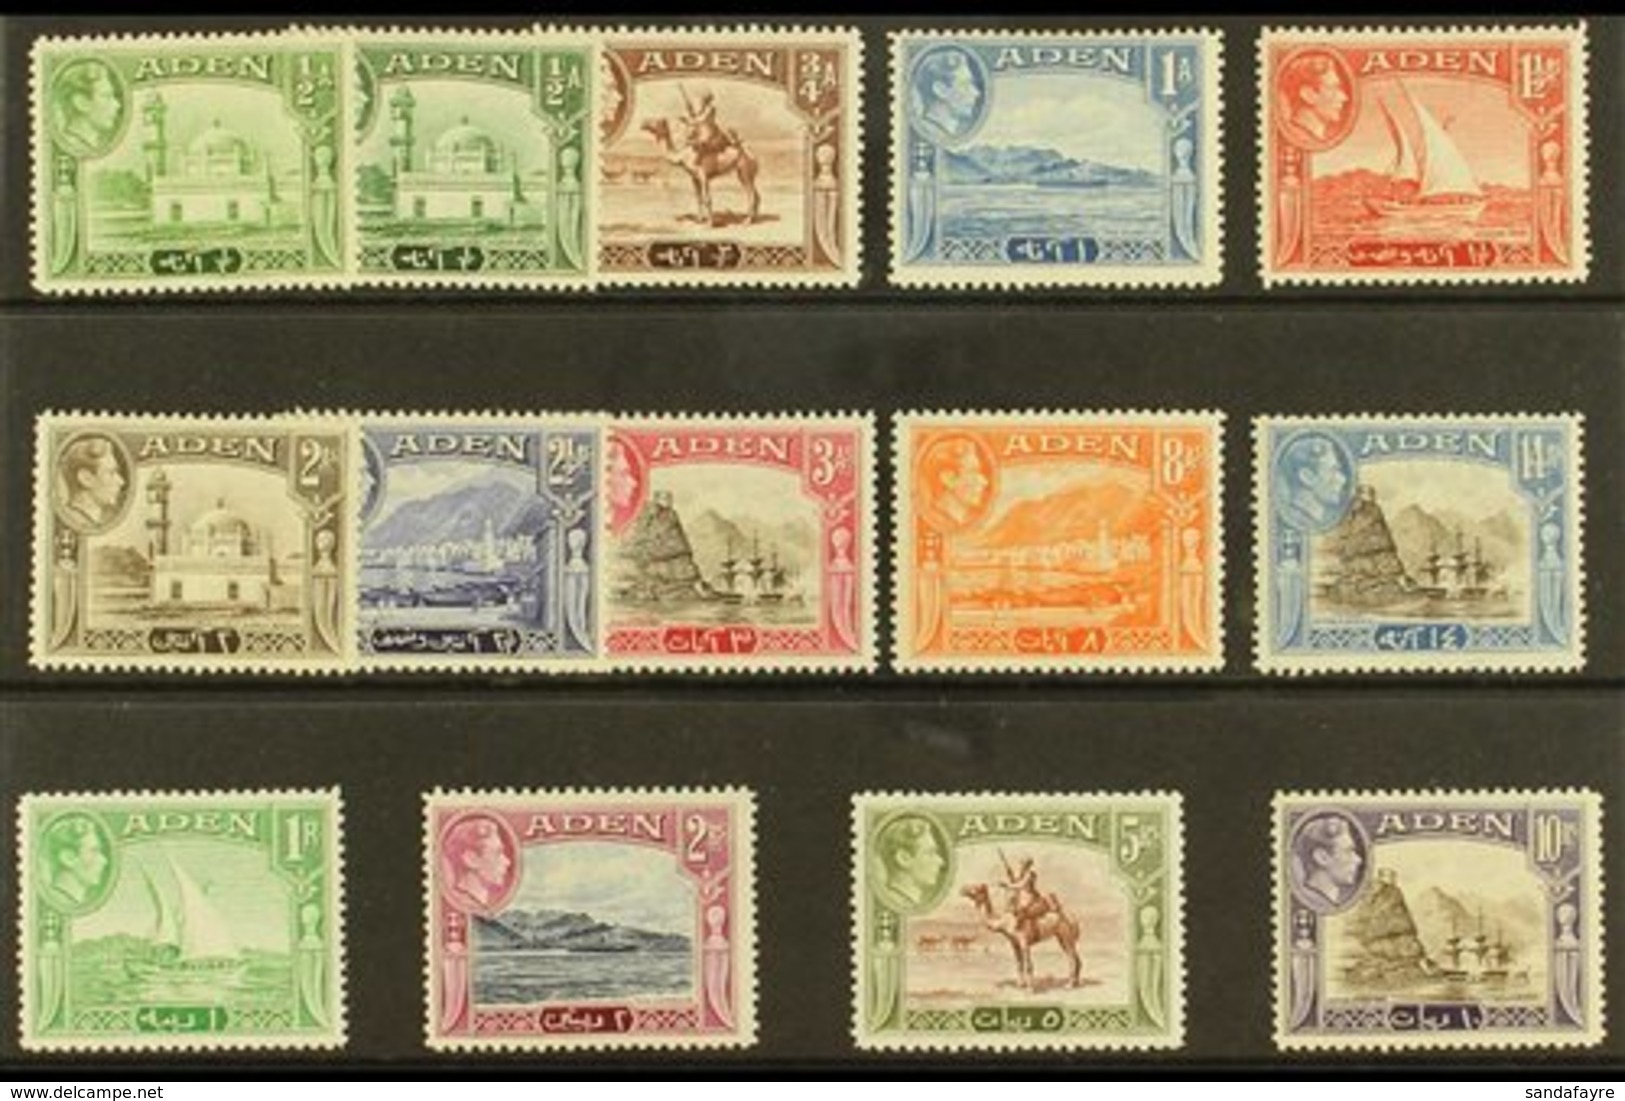 1939-48 Pictorial Definitive Set Plus ½a Listed Shade, SG 16/27, Very Fine Lightly Hinged Or Nhm (14 Stamps) For More Im - Aden (1854-1963)